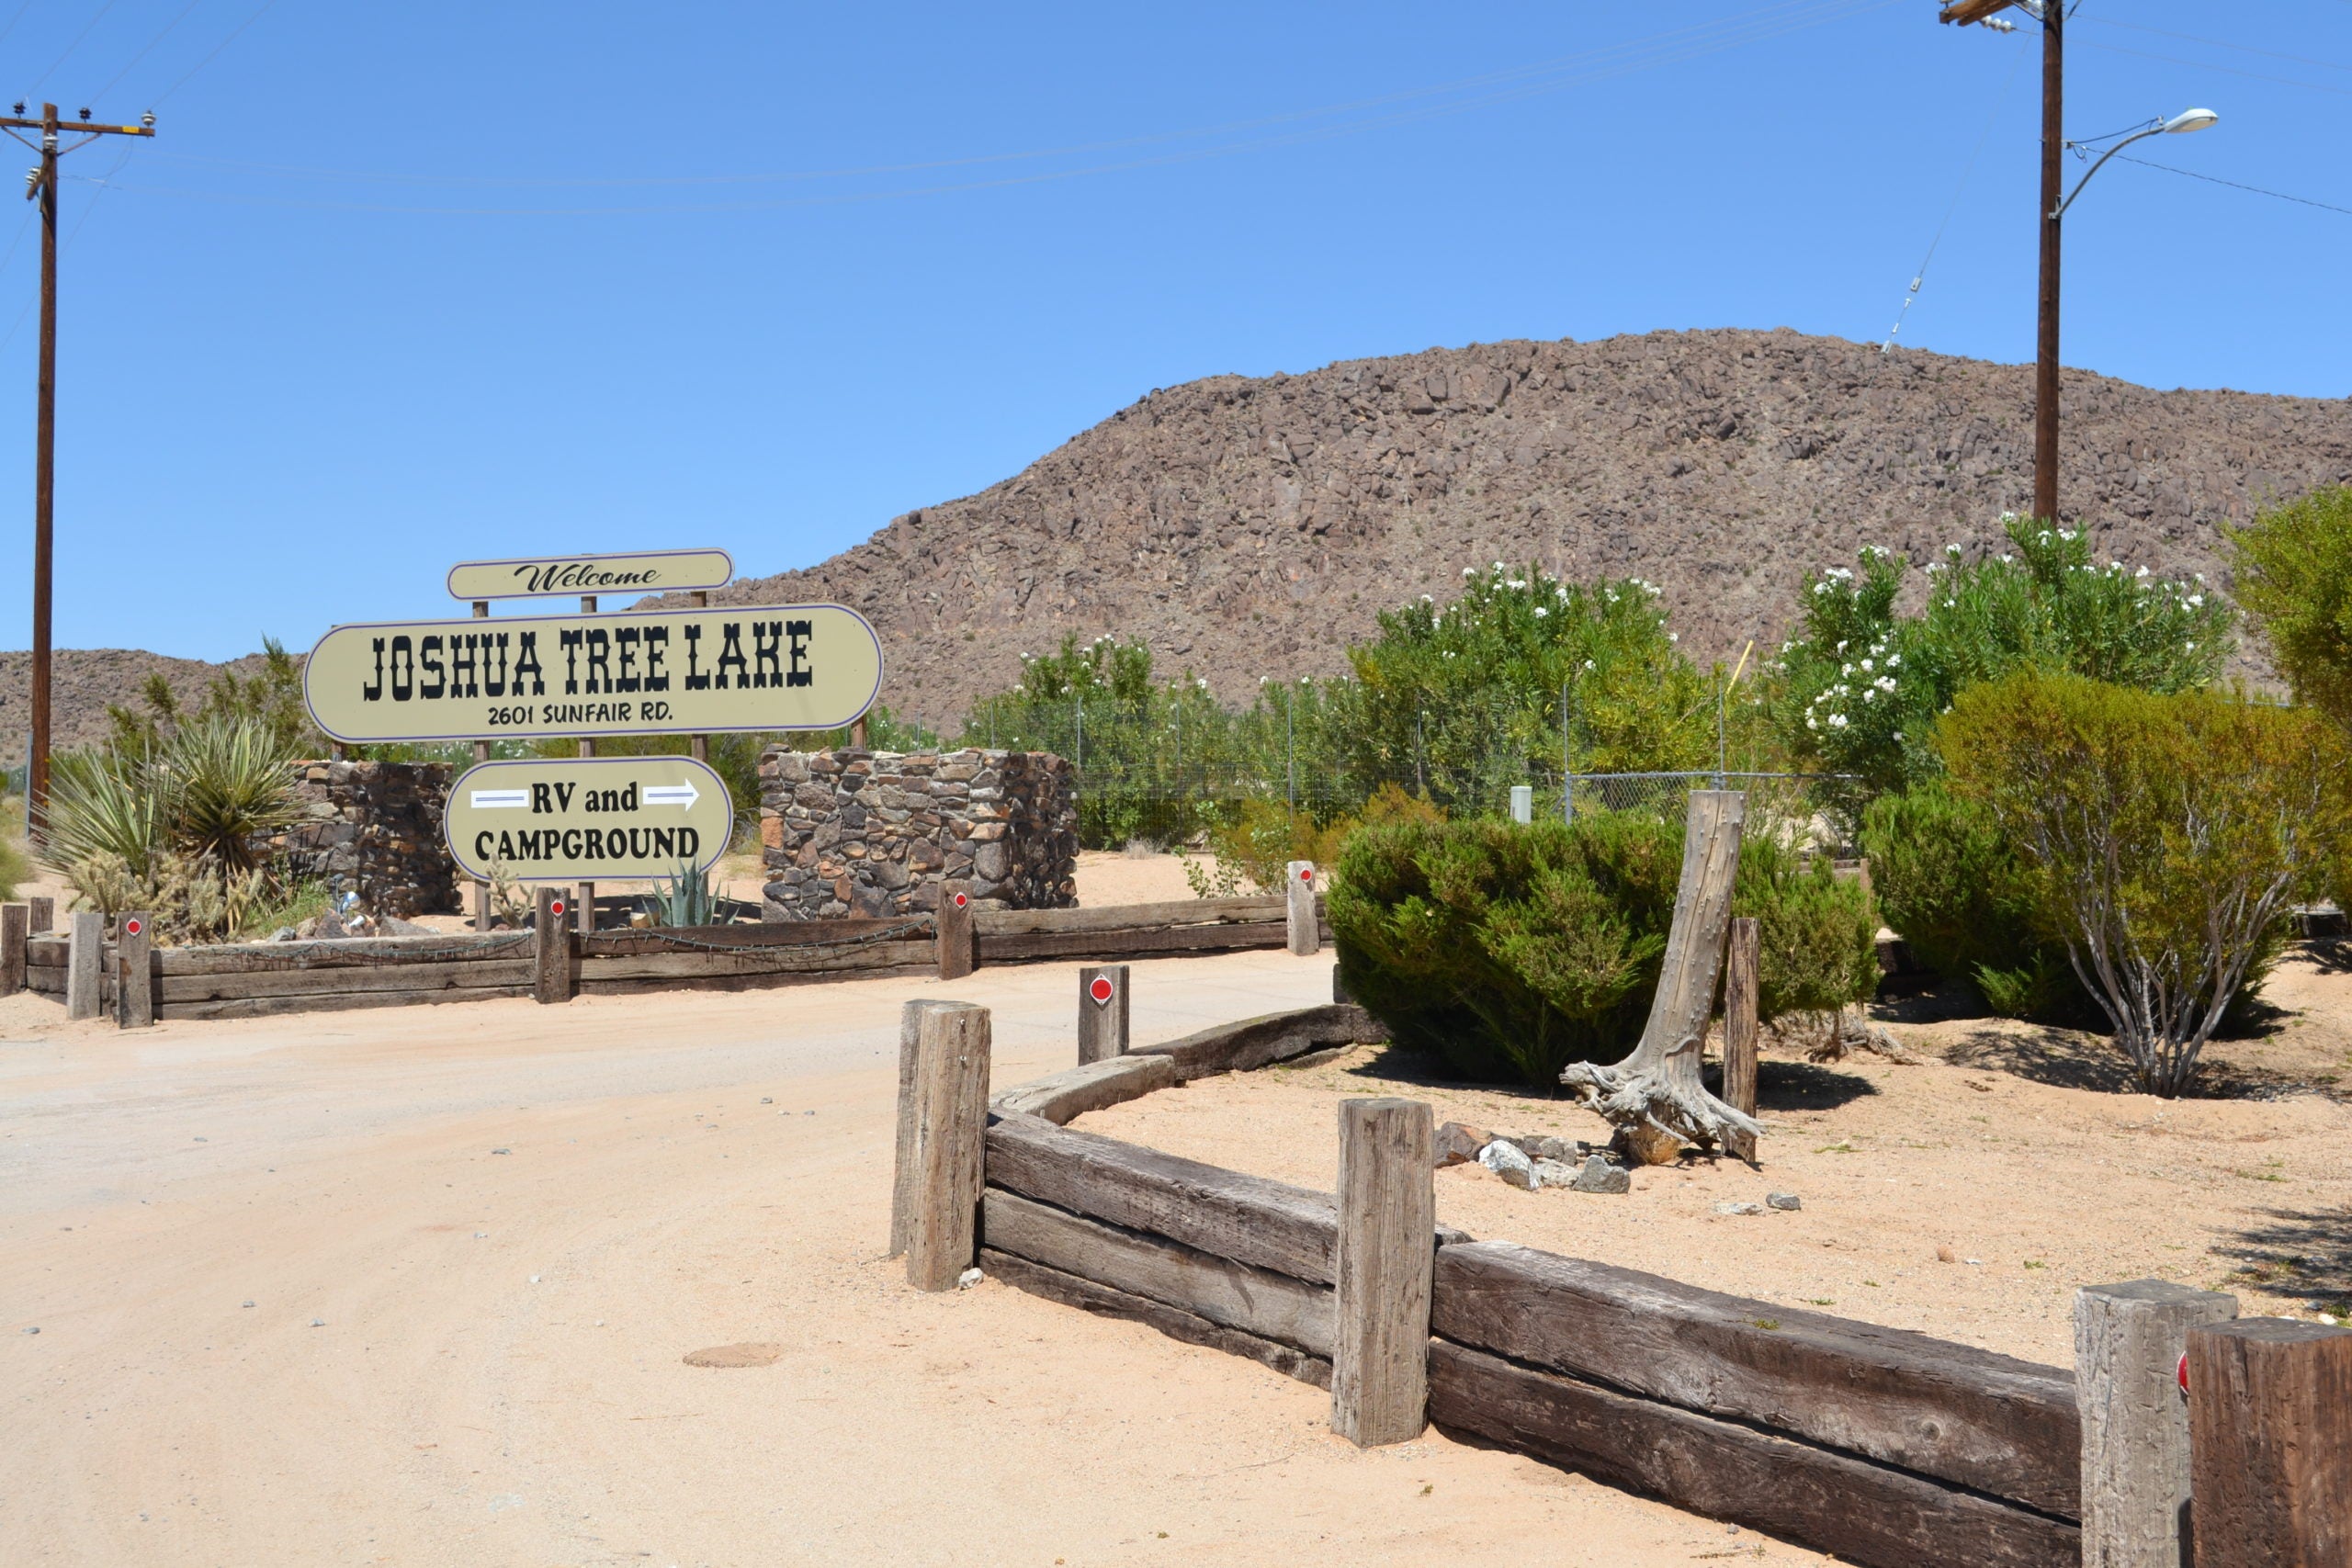 Camper submitted image from Joshua Tree Lake RV & Campground - 2